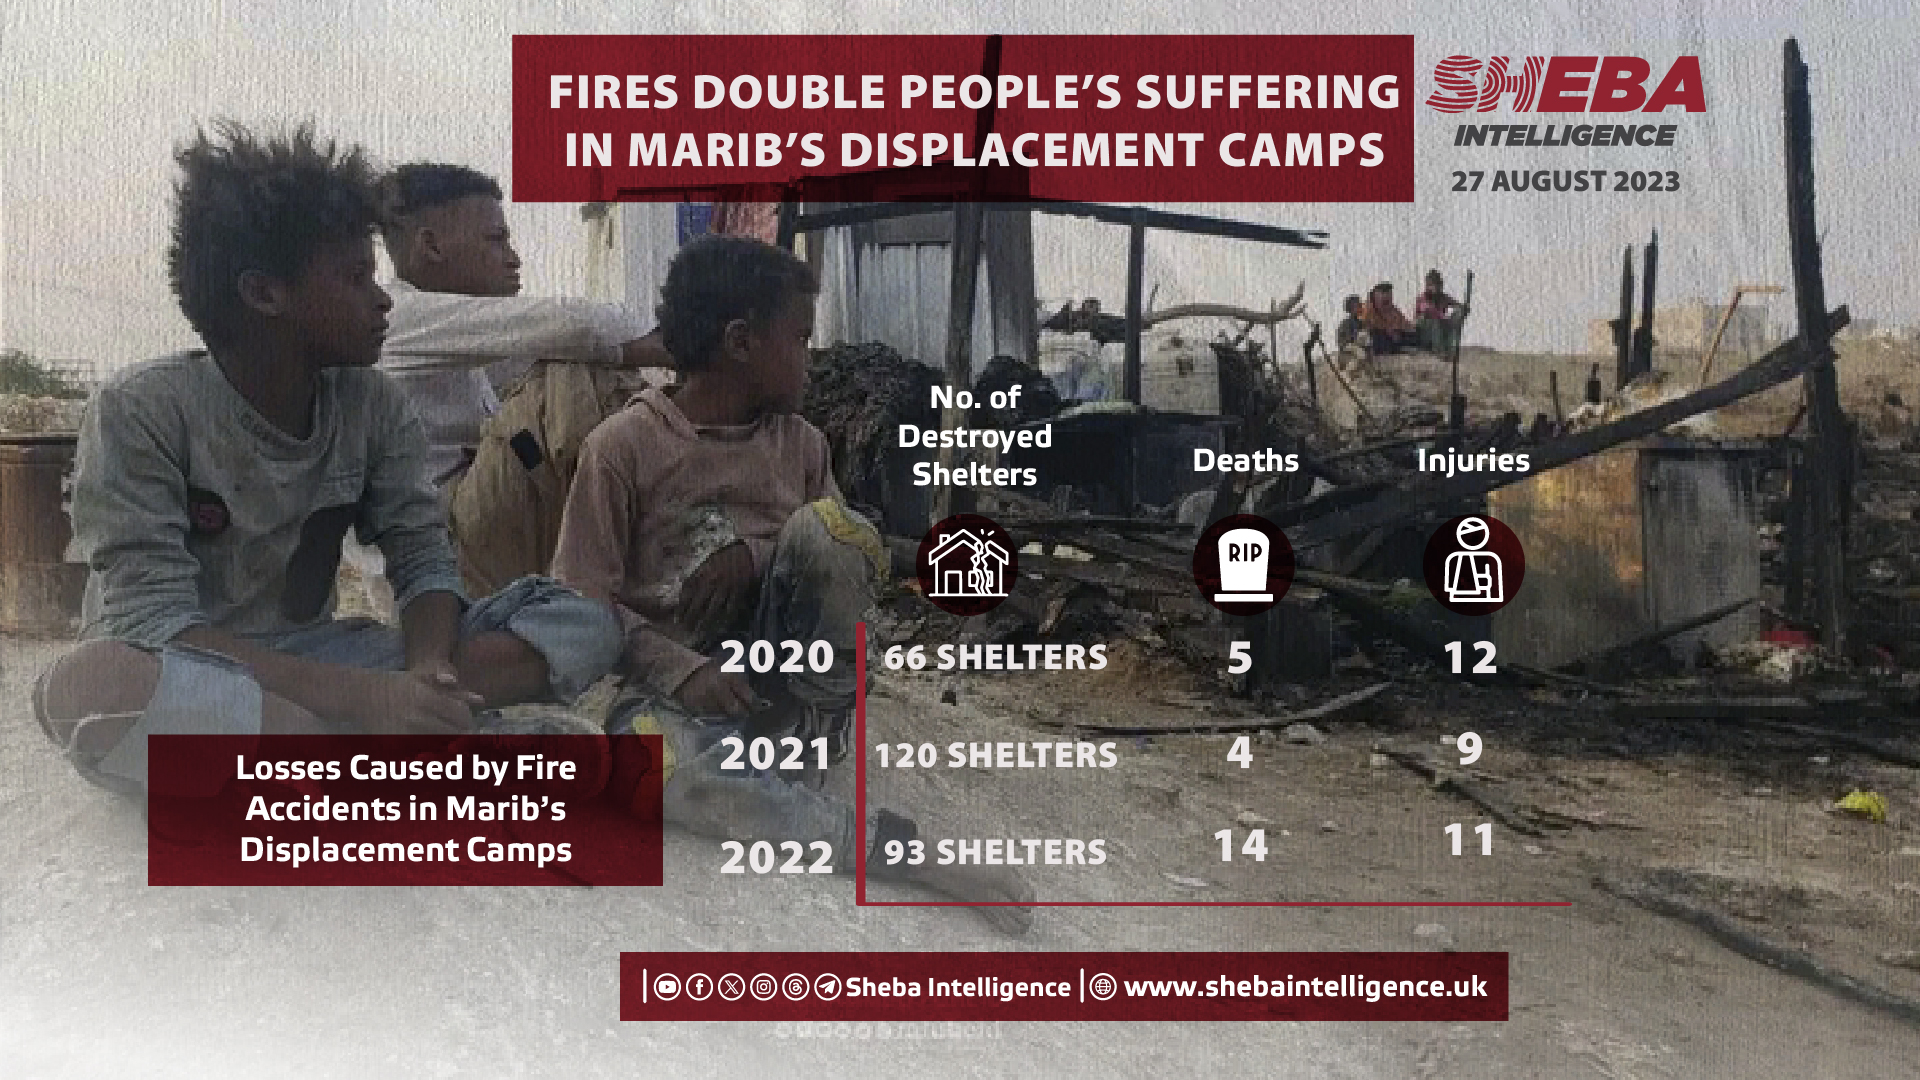 Fires Double People’s Suffering in Marib’s Displacement Camps